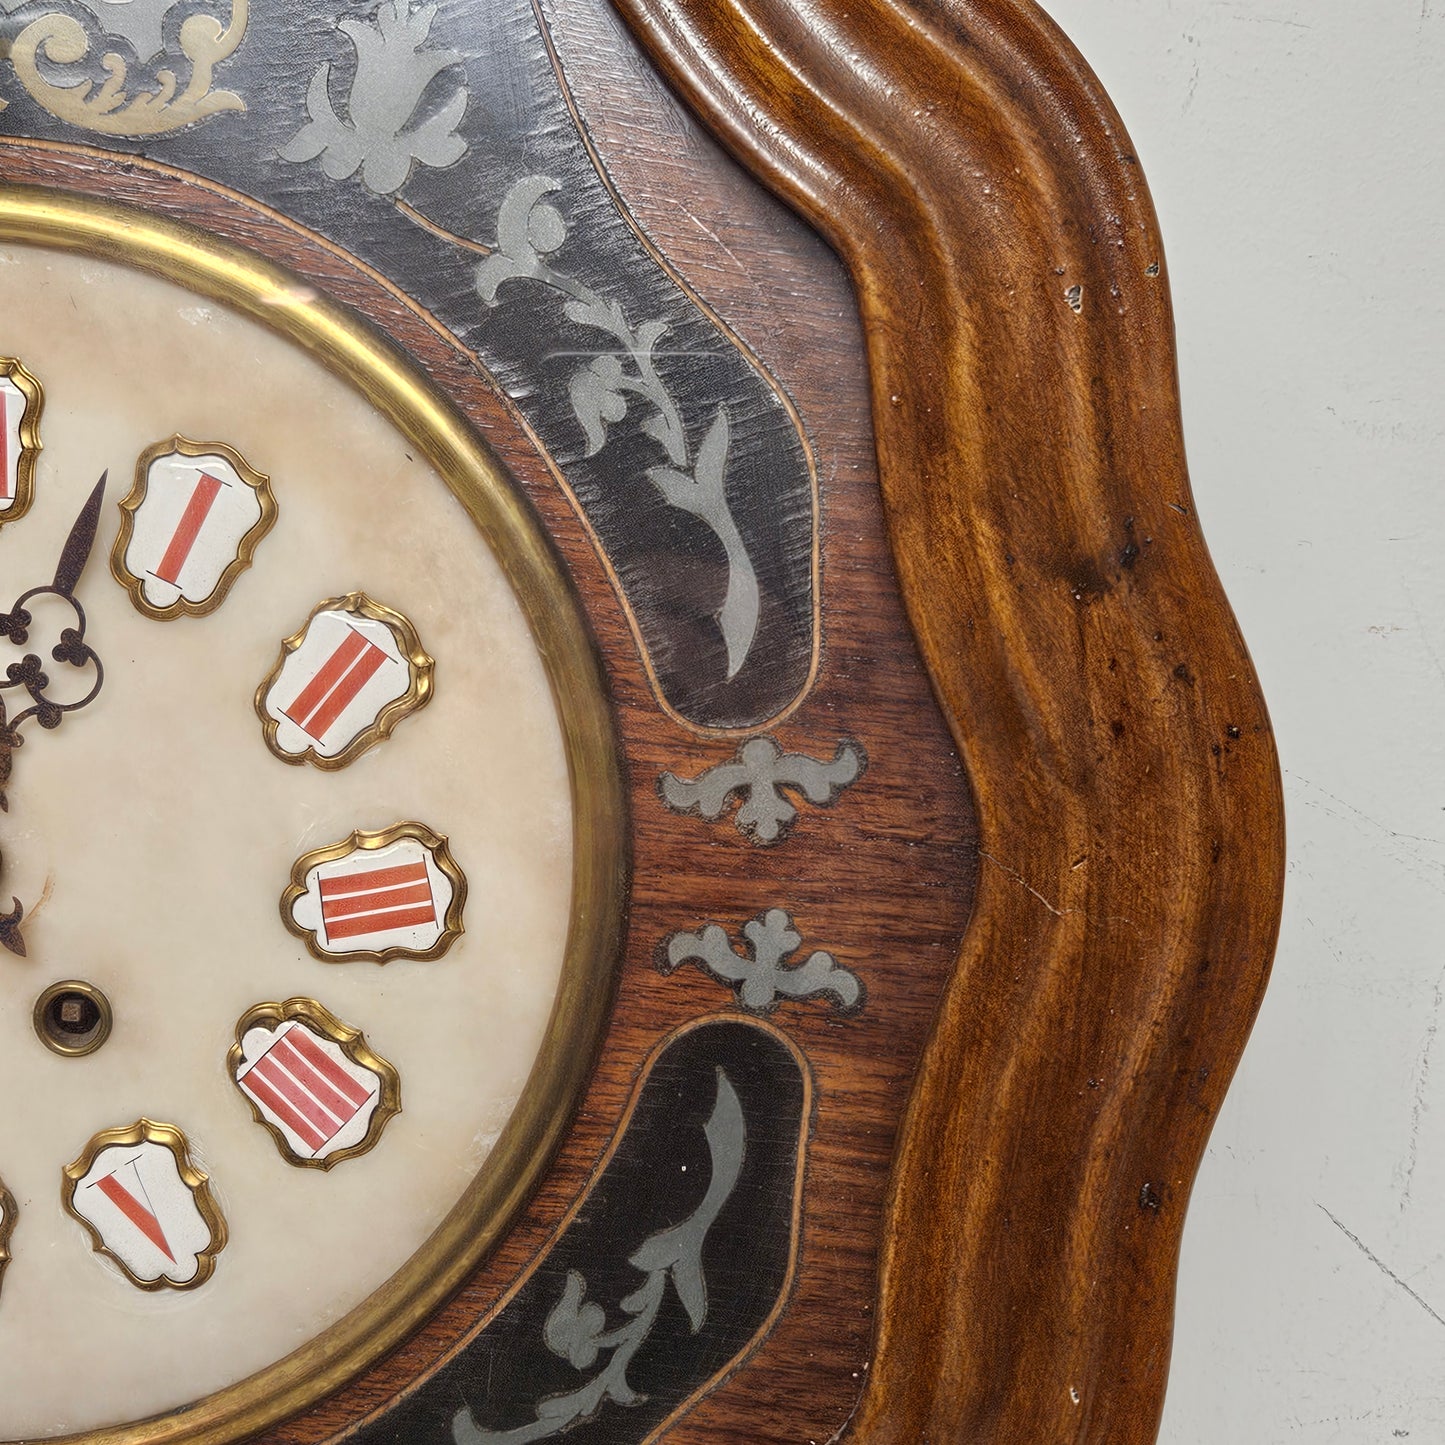 Antique Mother of Pearl Inlaid Wooden Wall Clock